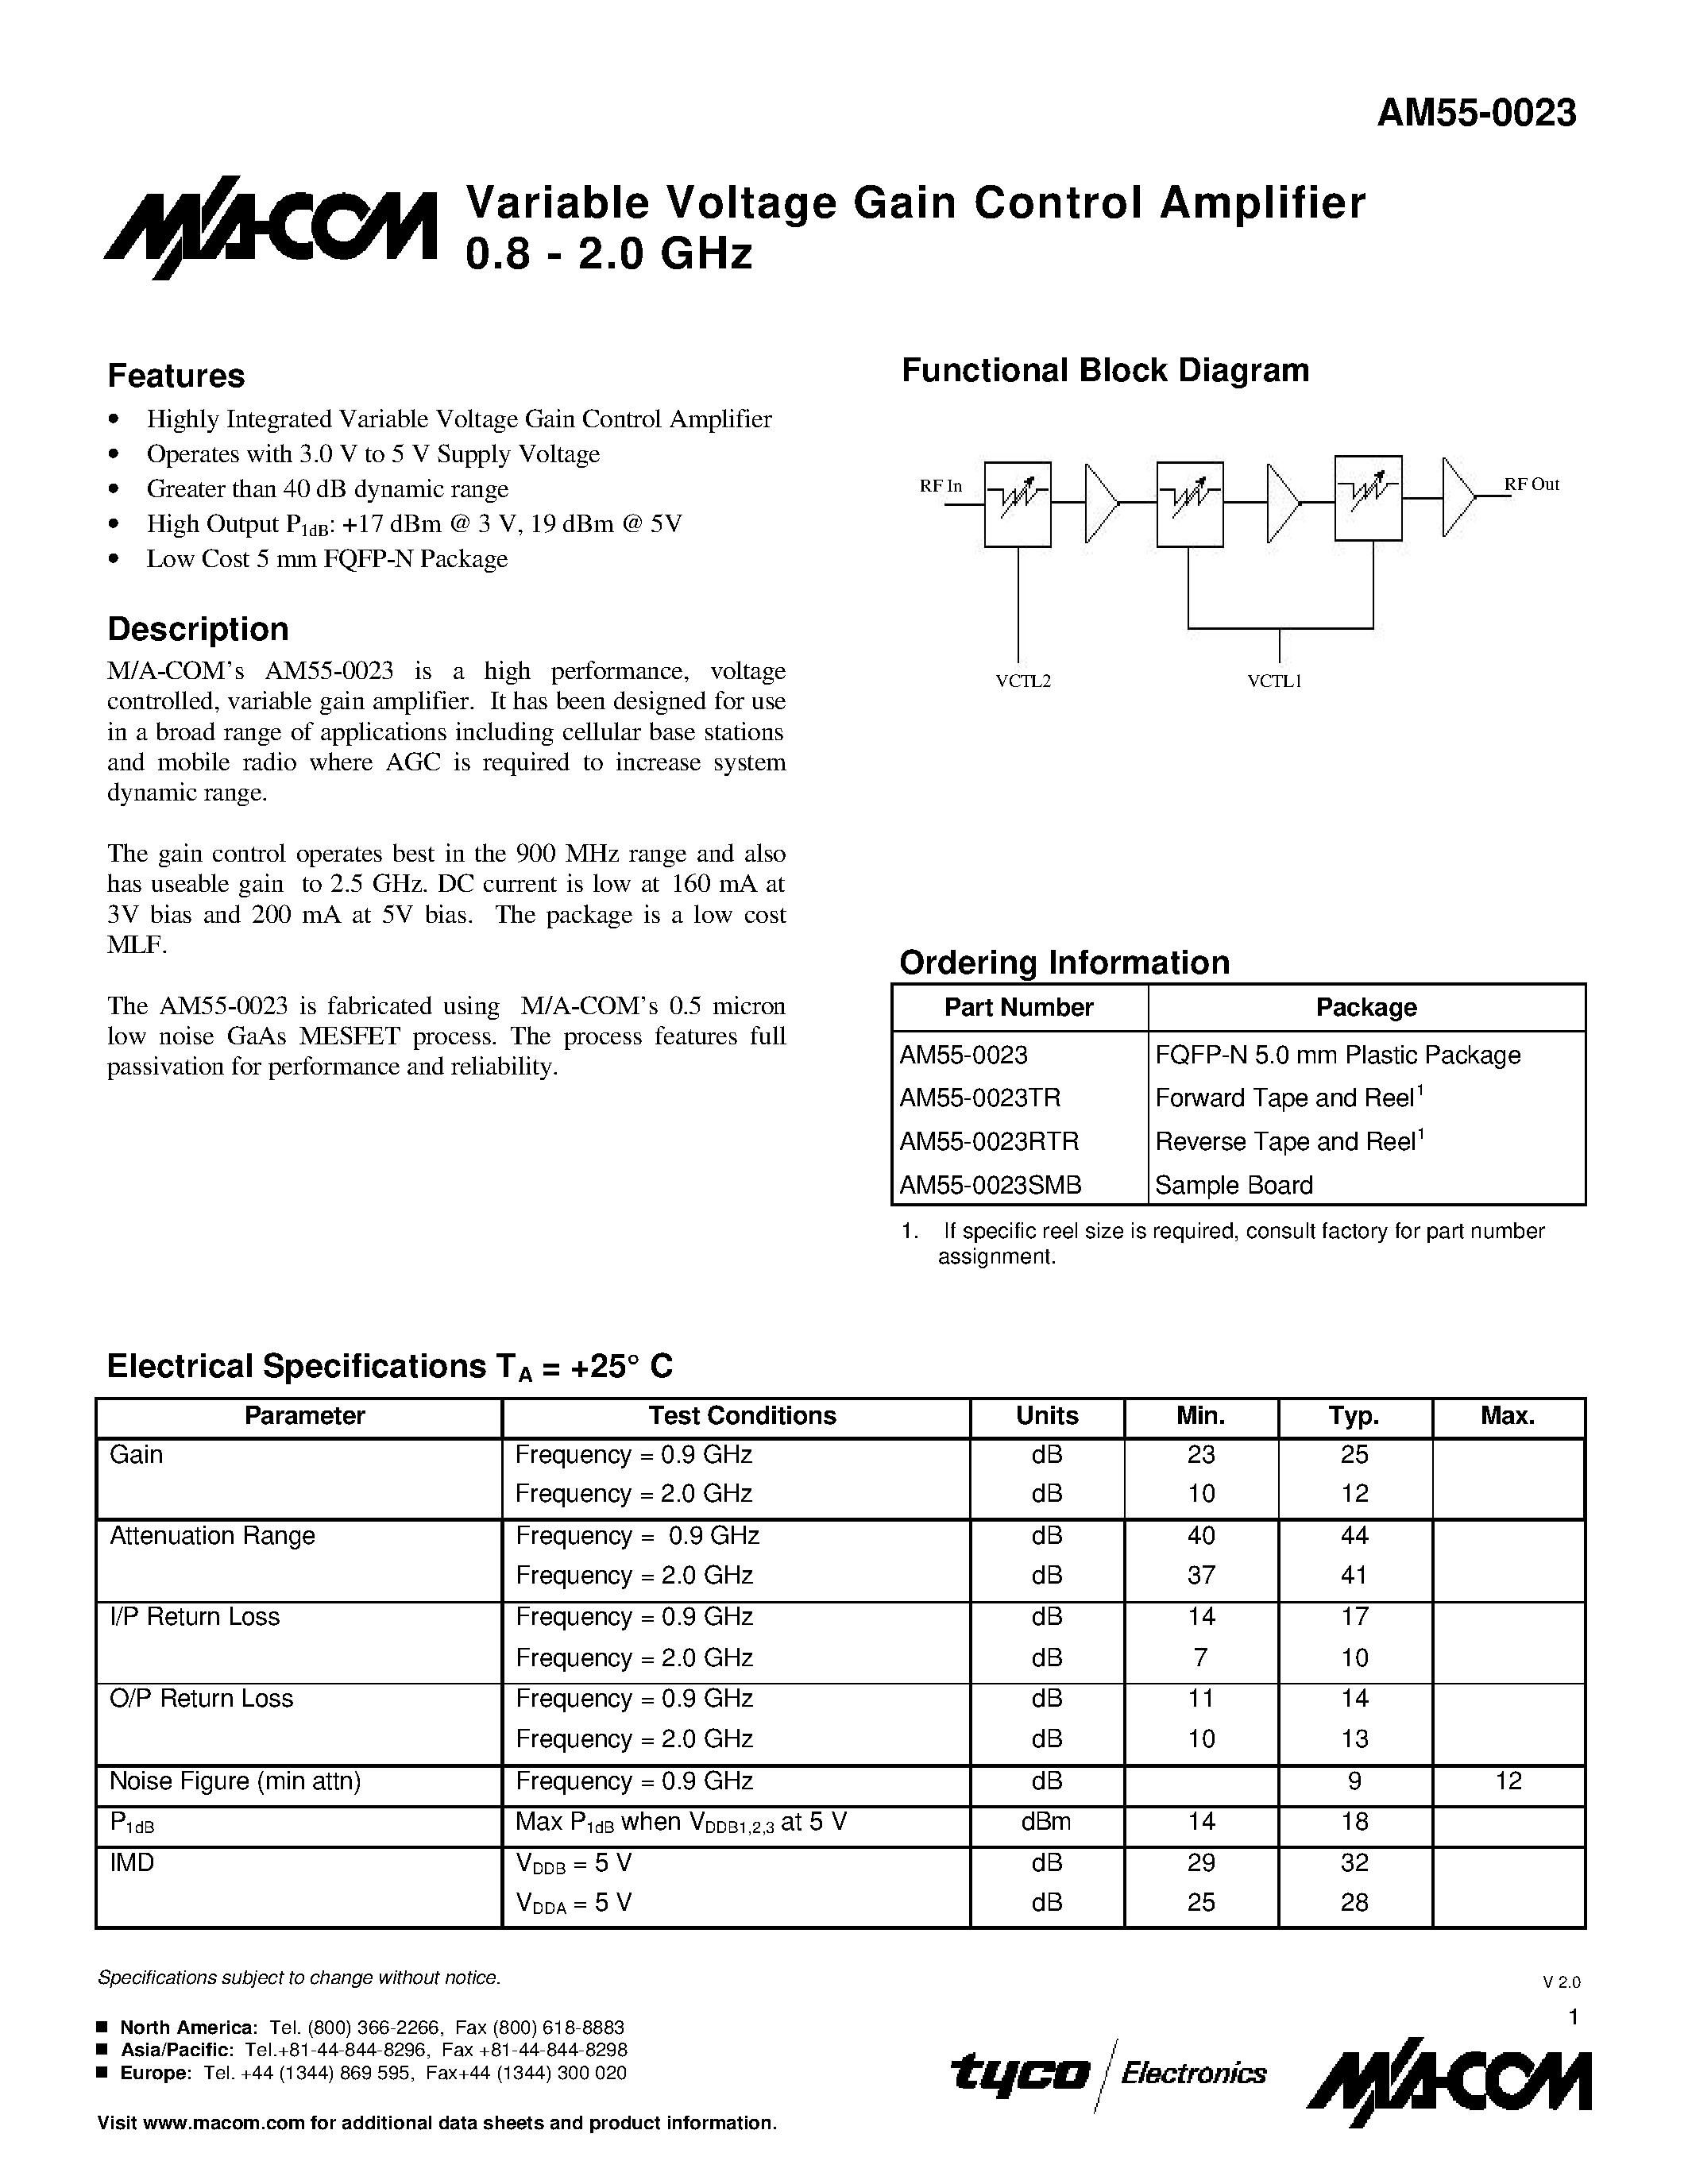 Datasheet AM55-0023TR - Variable Voltage Gain Control Amplifier 0.8 - 2.0 GHz page 1